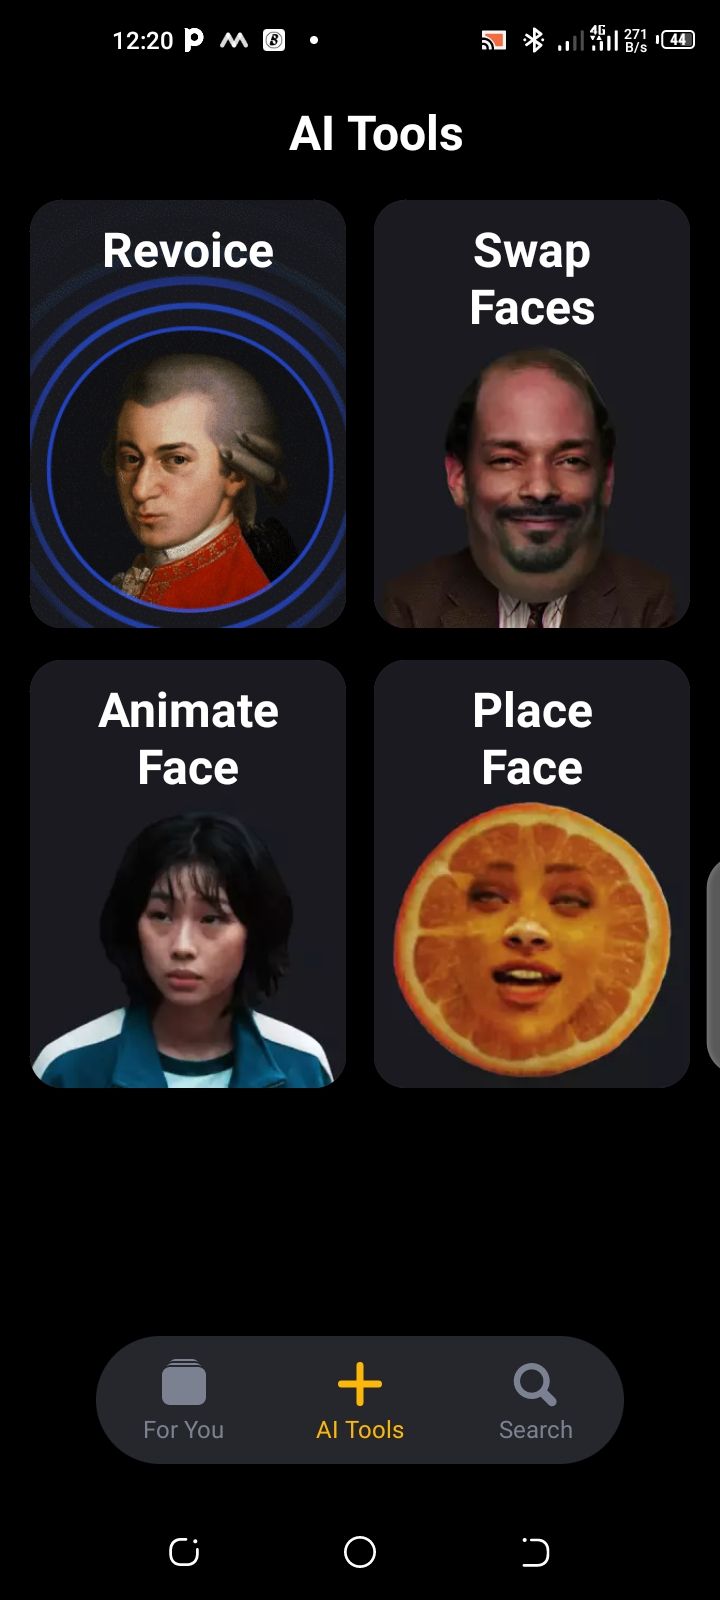 Tools available on the RefaceApp